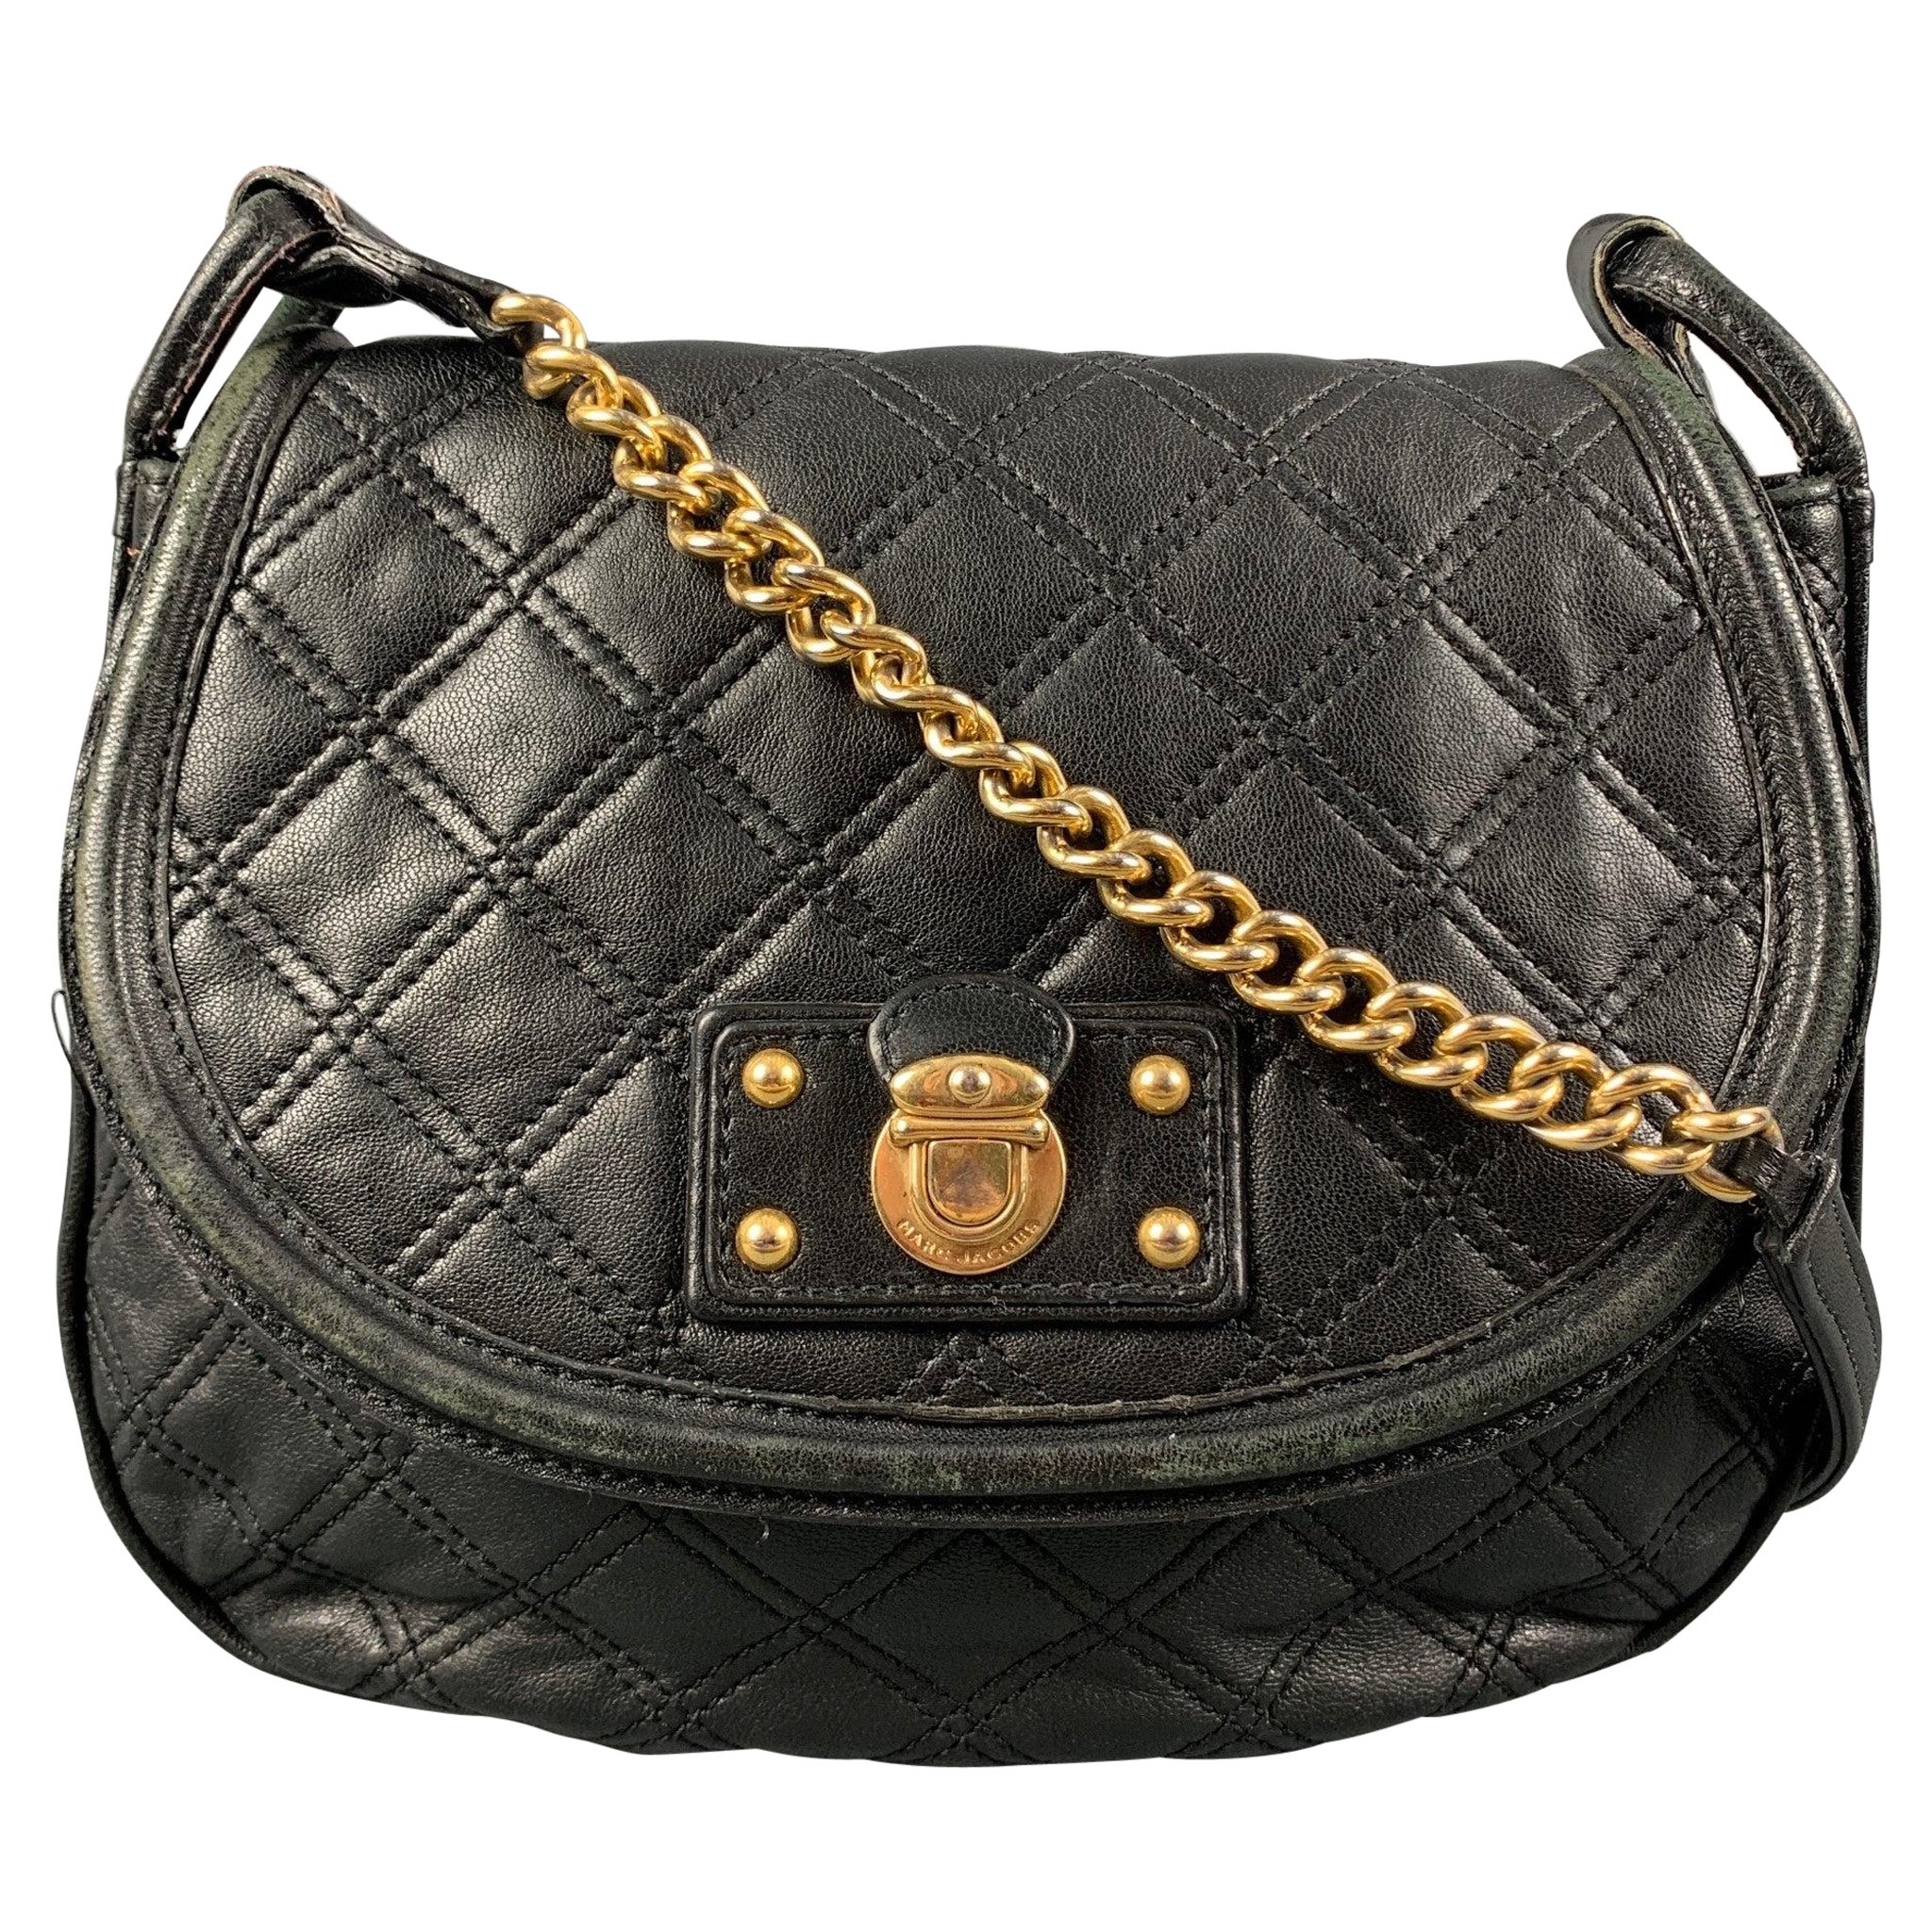 MARC JACOBS Black Quilted Leather Cross Body Handbag For Sale